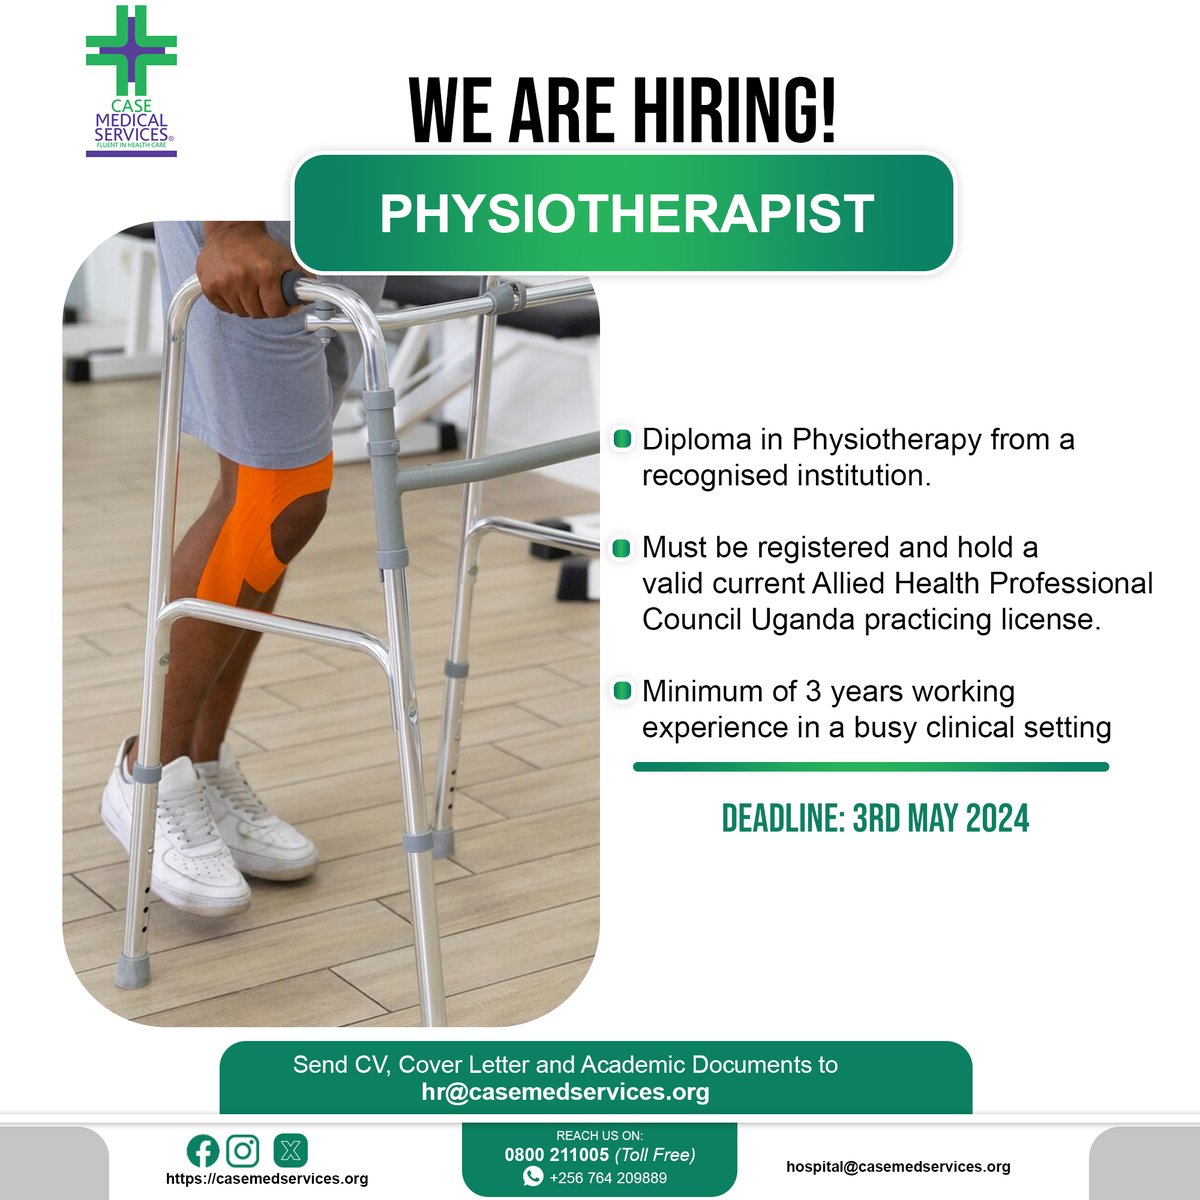 Are you passionate about physiotherapy? We want to work with you. Apply now through hr@casemedservices.org.
#vacancy